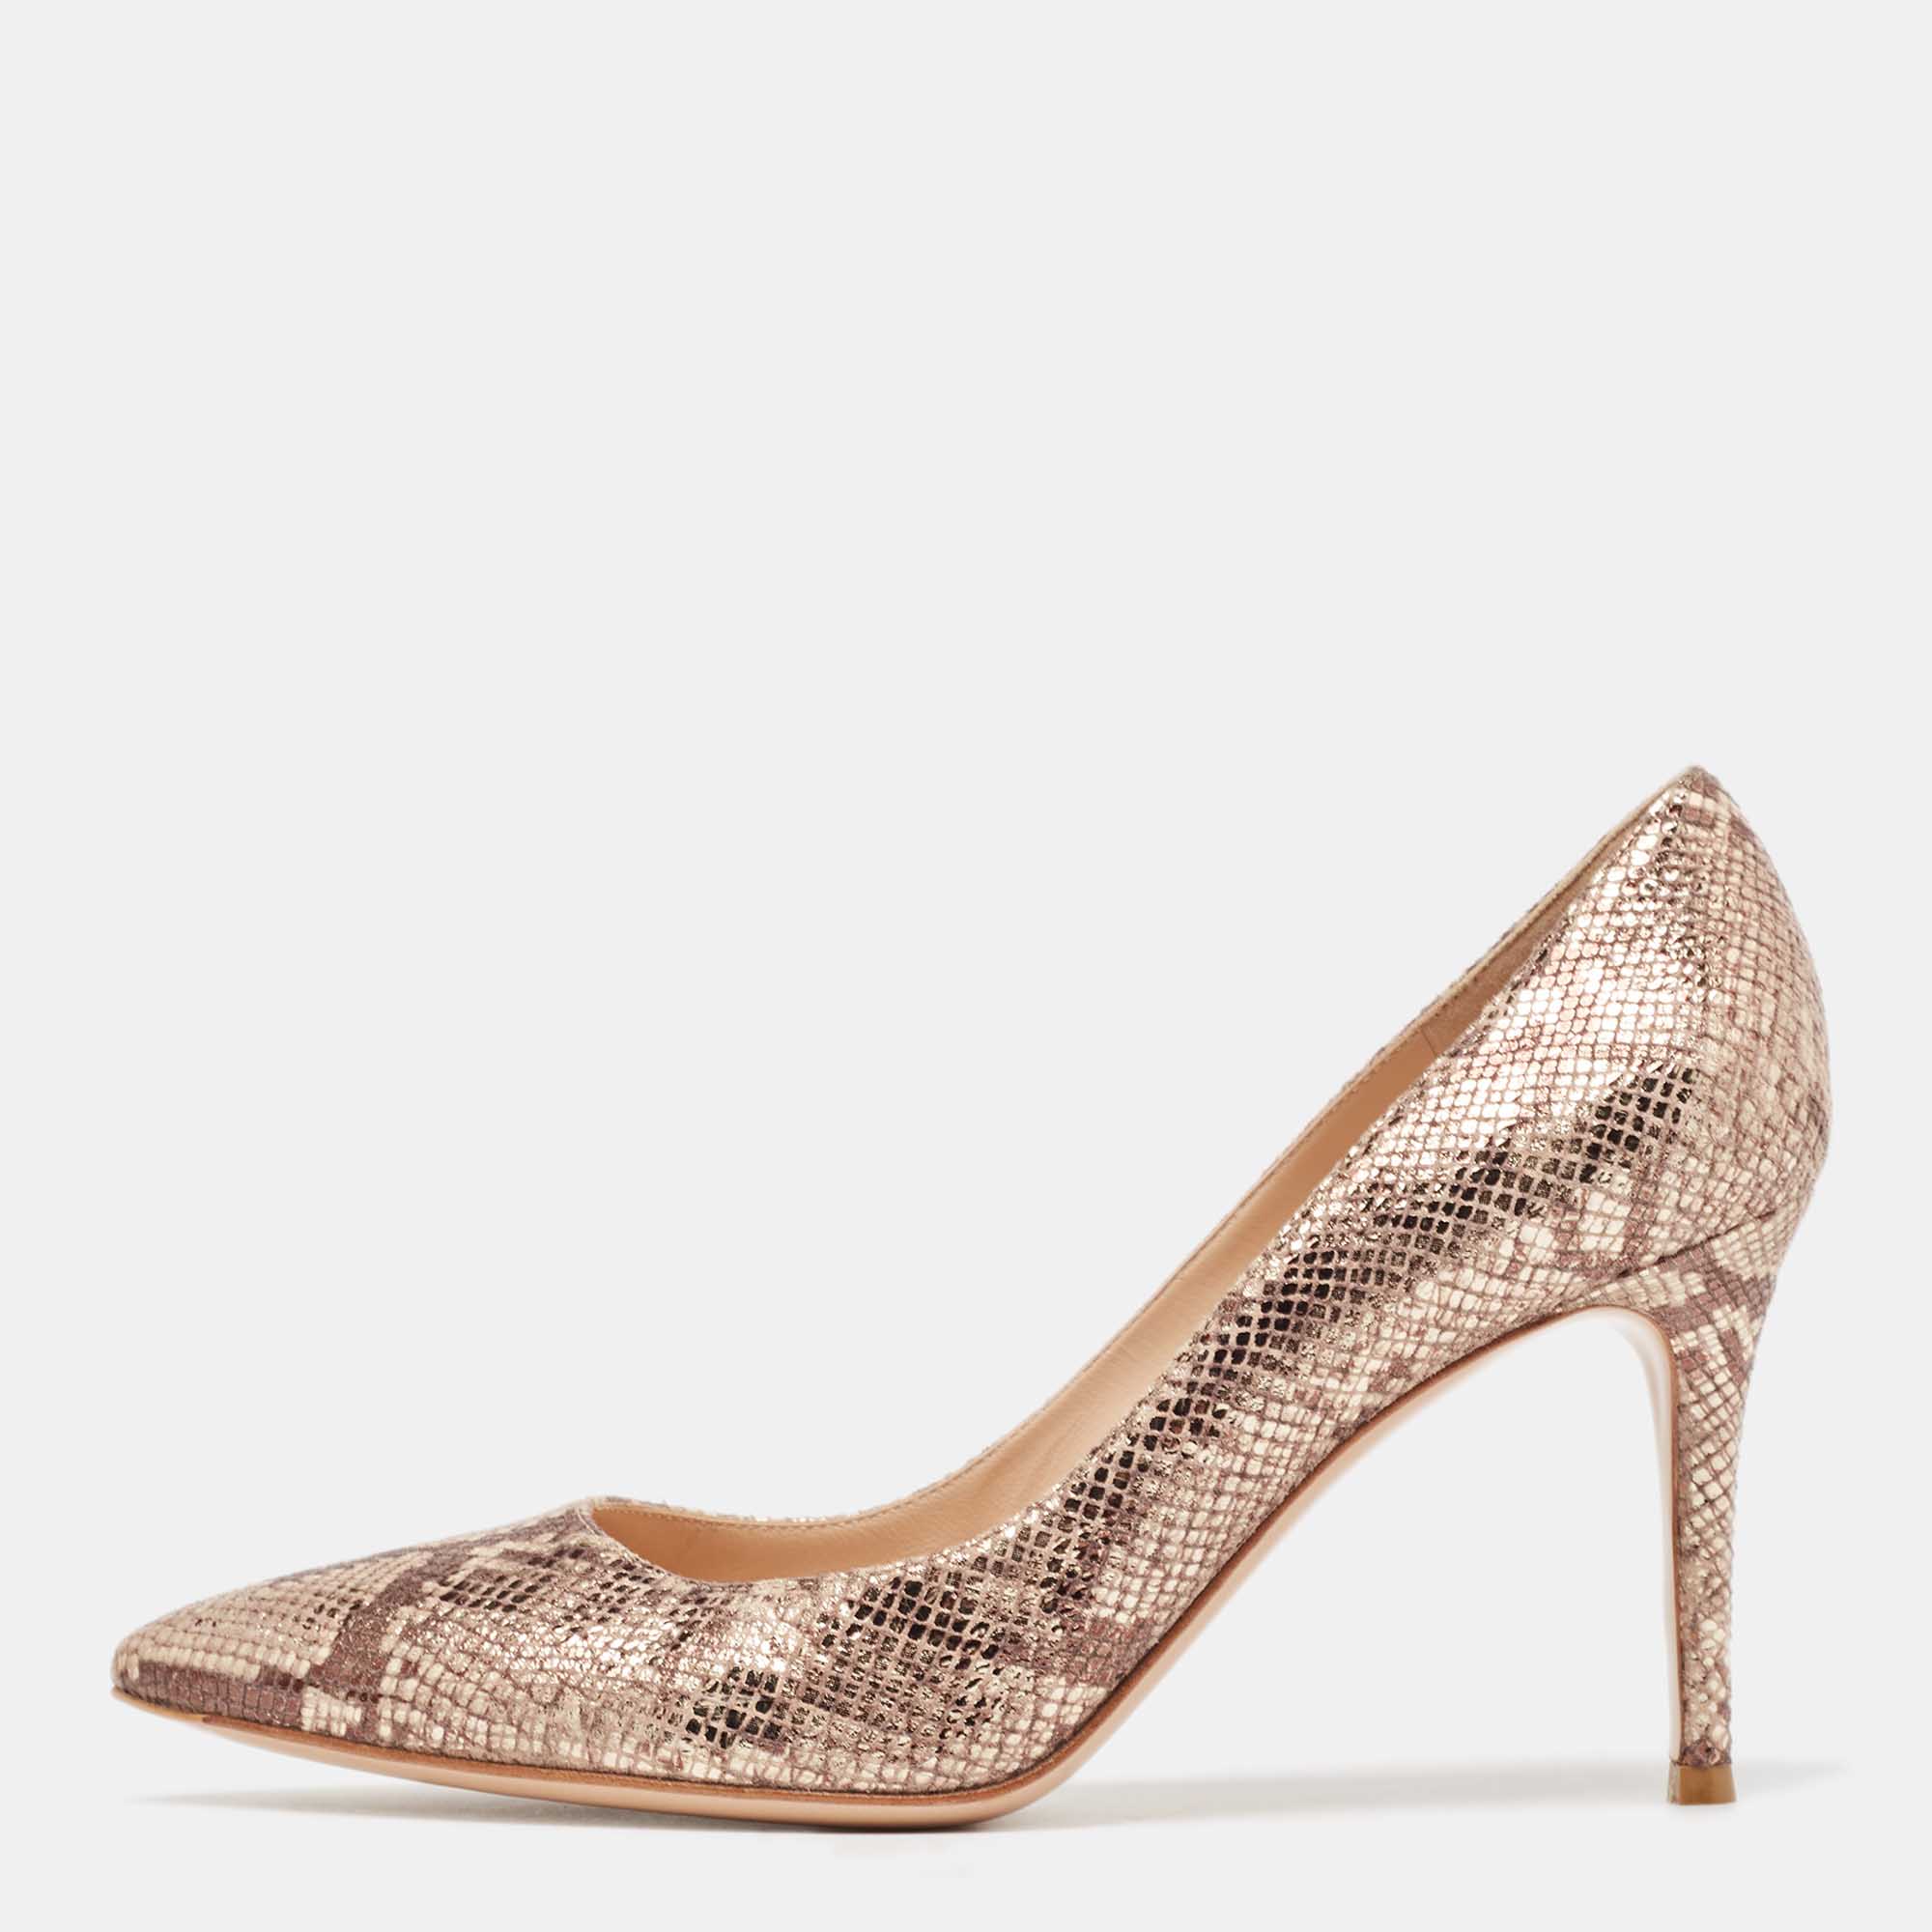 Pre-owned Gianvito Rossi Beige/brown Python Embossed Leather Pointed Toe Pumps Size 39